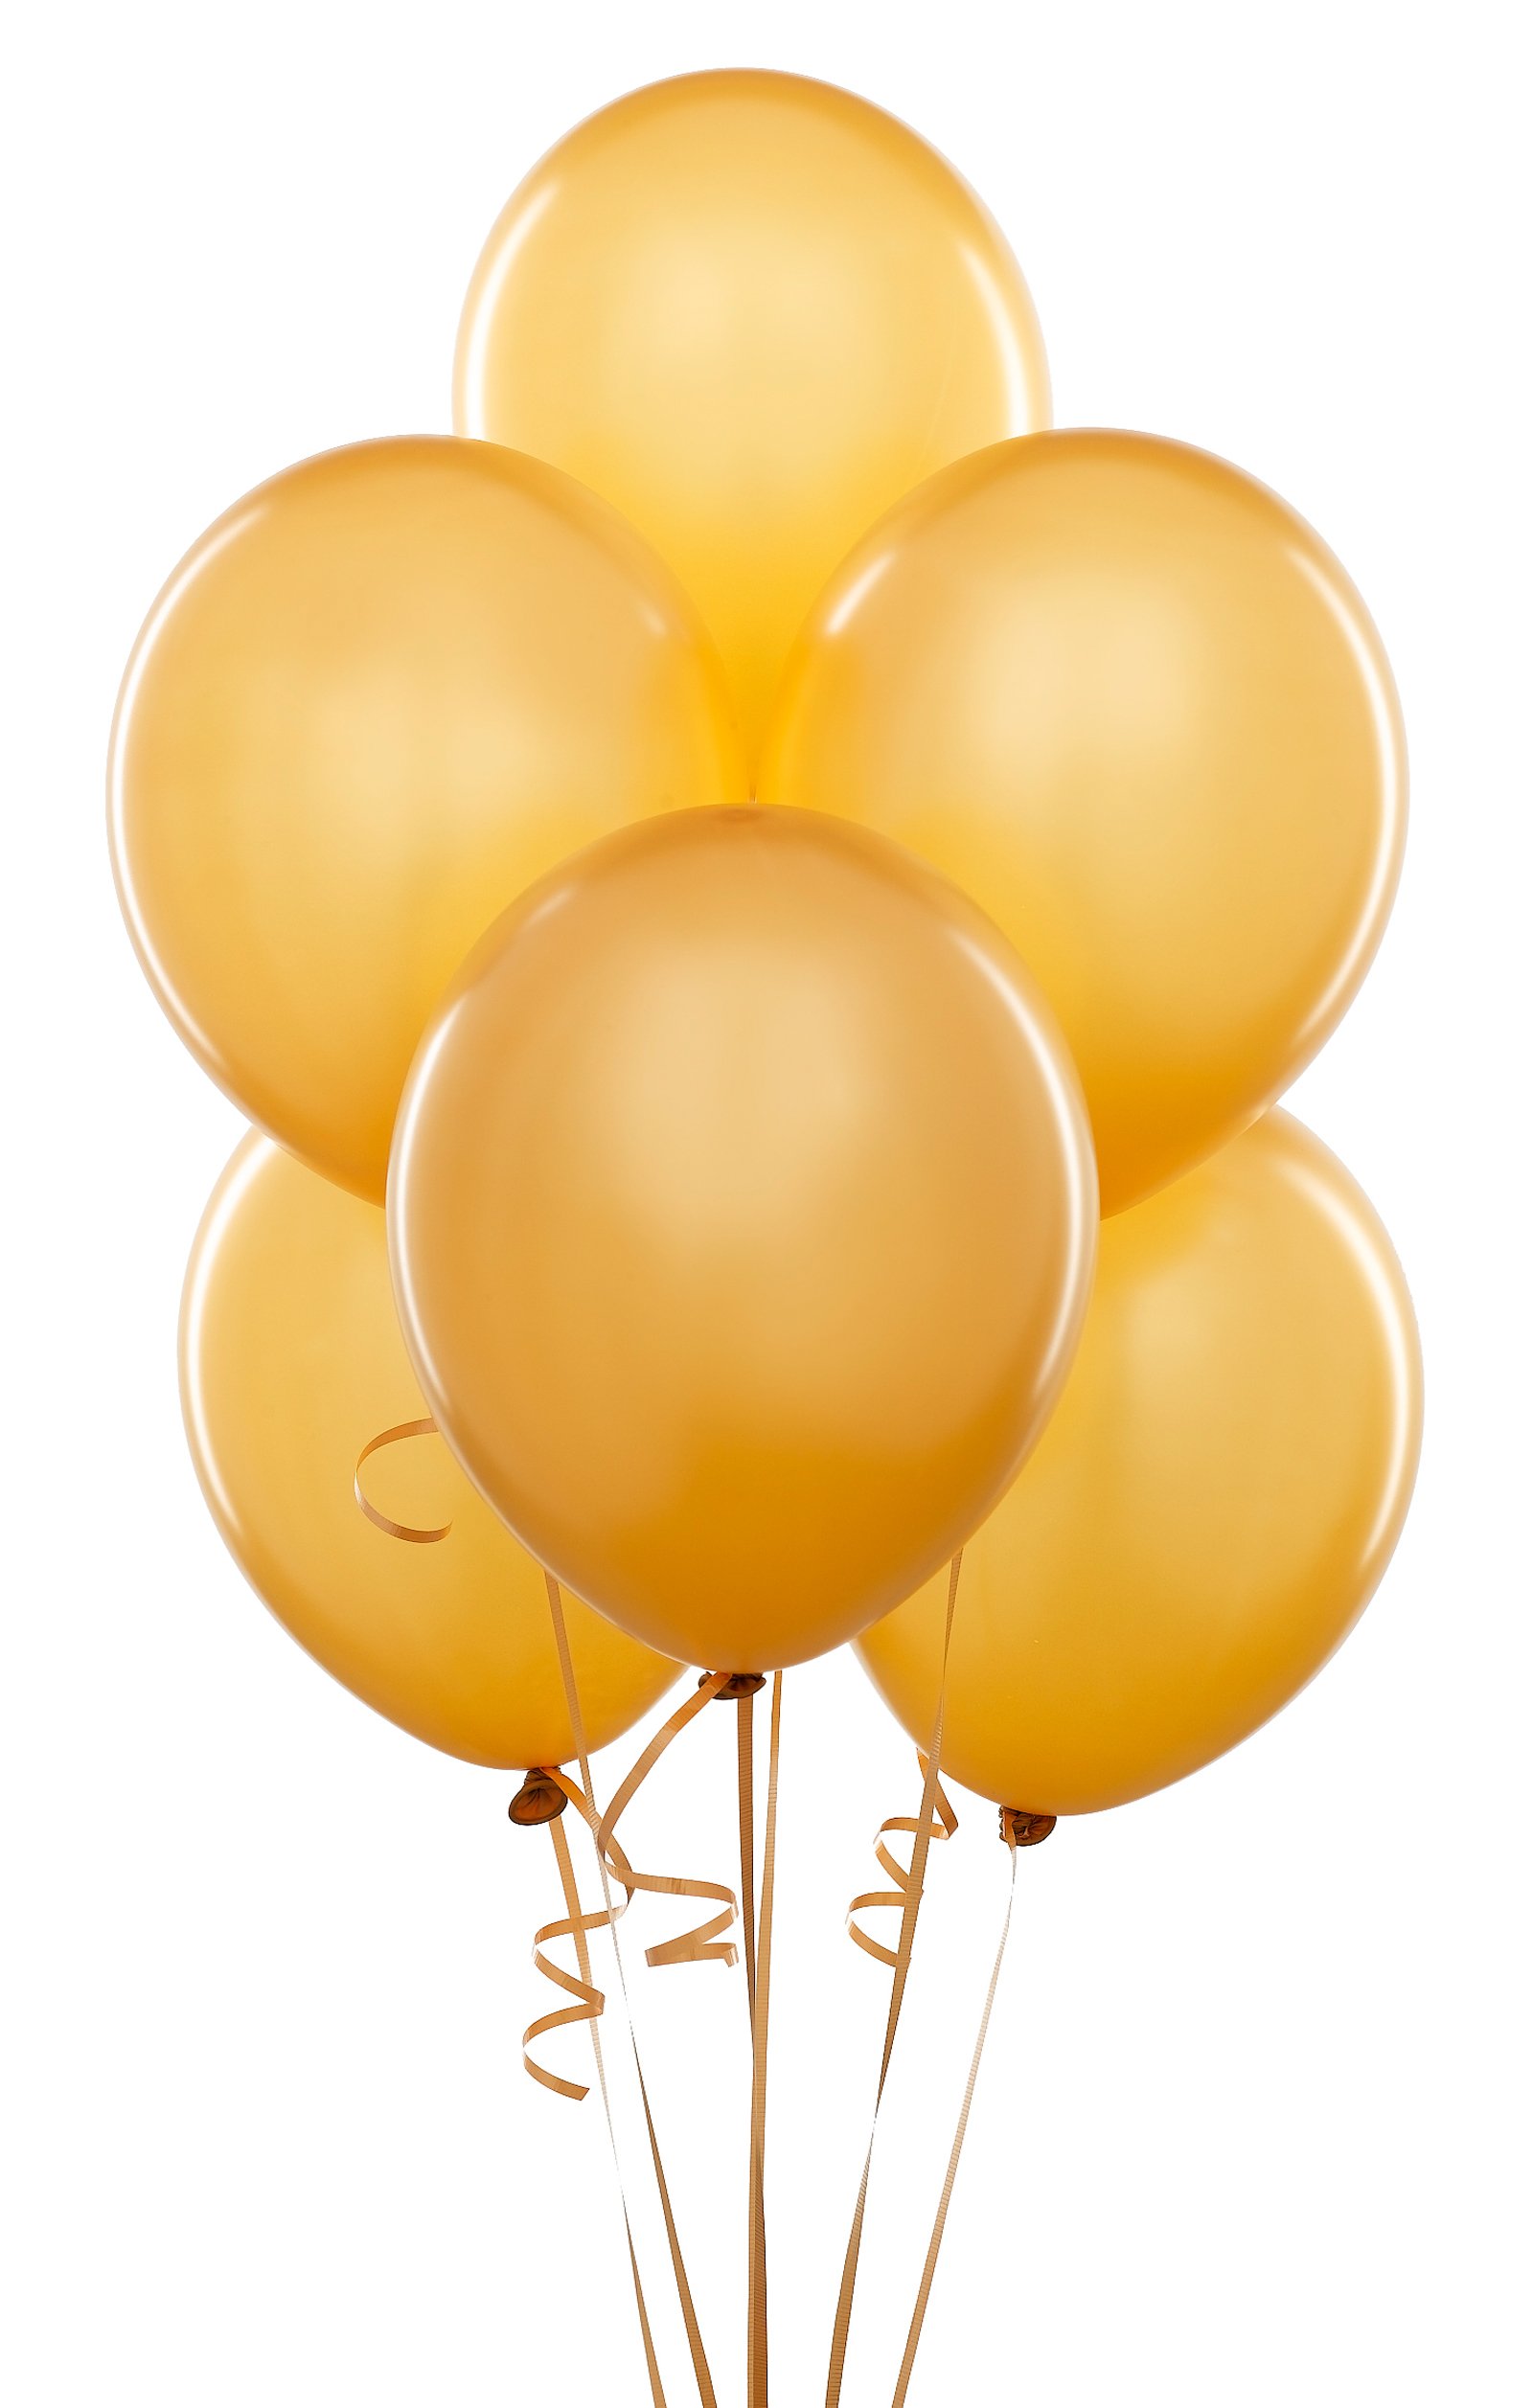 Balloons clipart green and gold